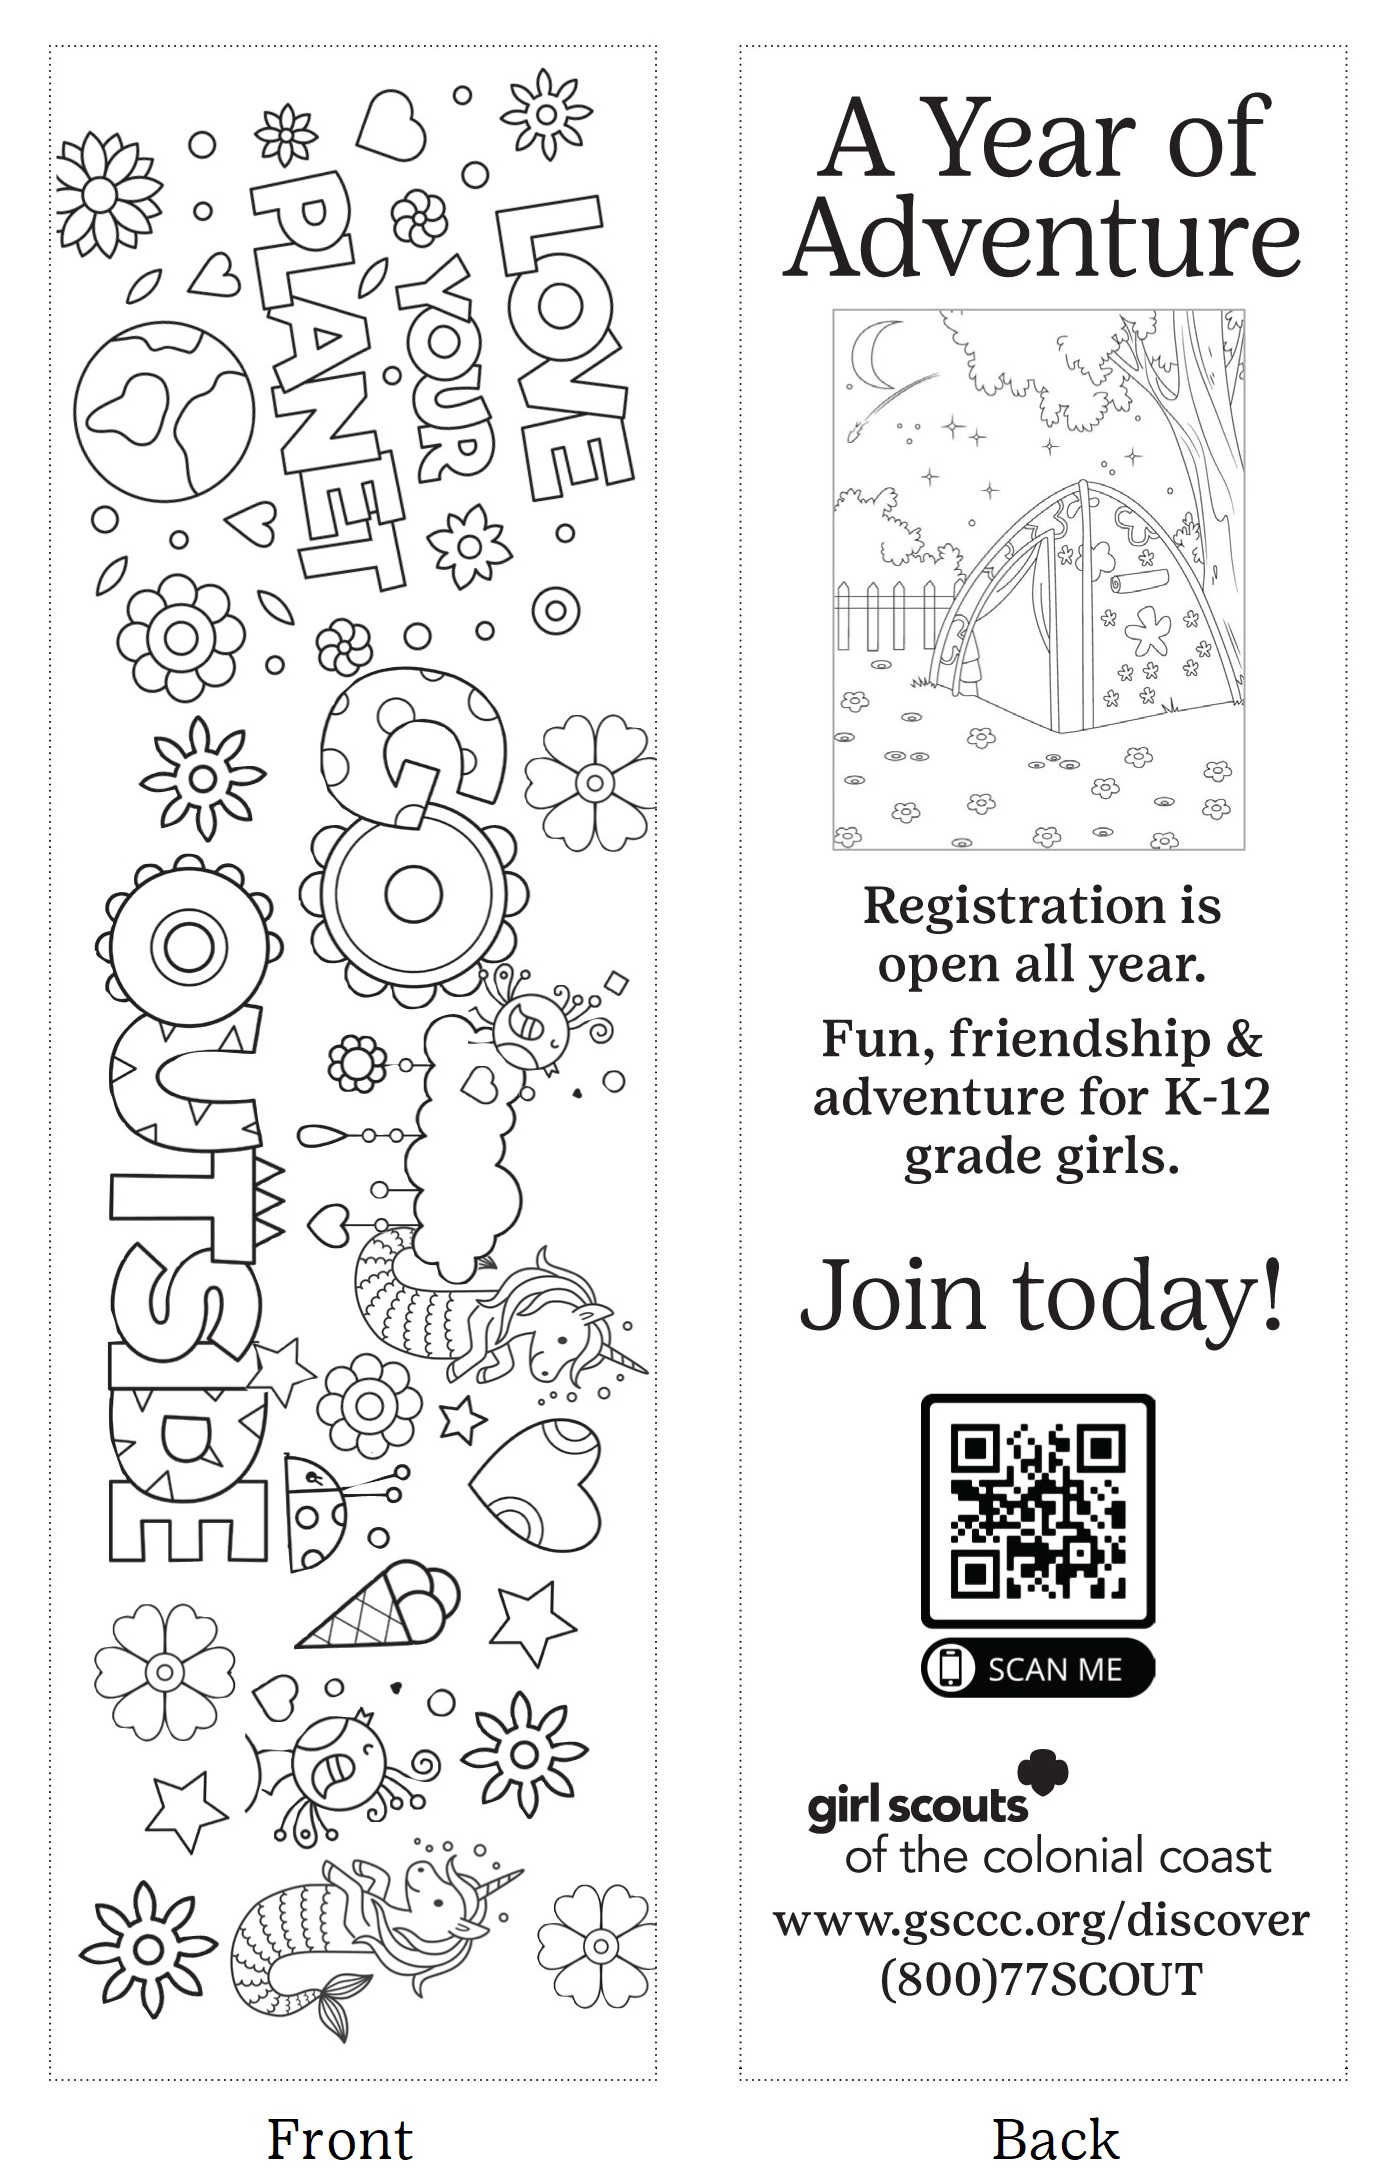 Join Girl Scouts Bookmark to Color